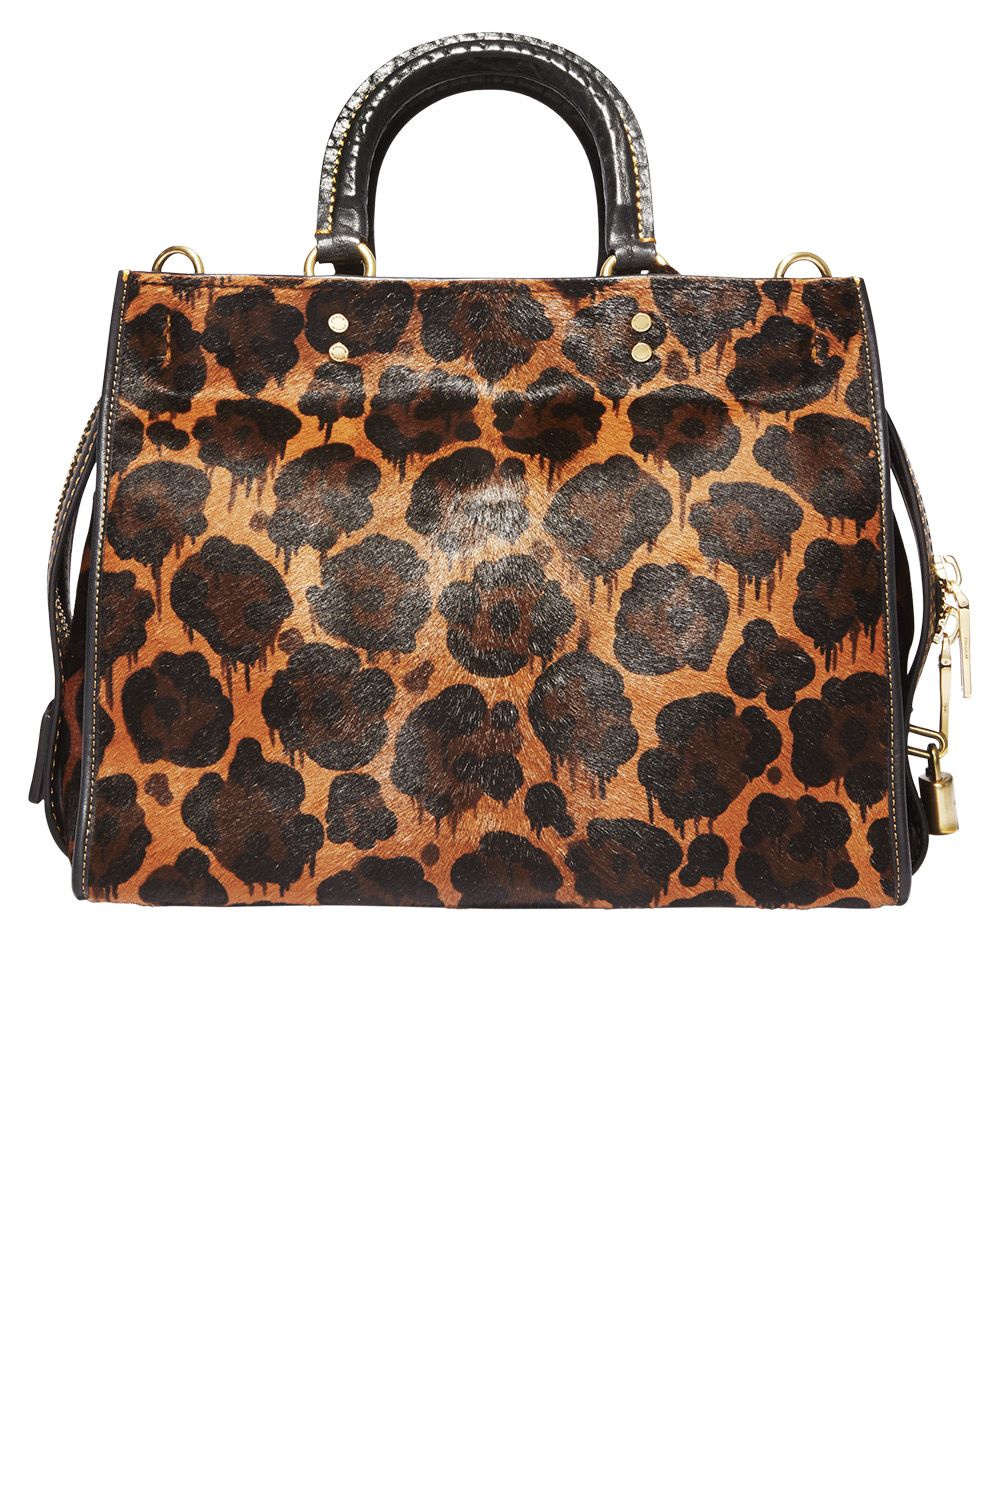 10 Perfect Leopard-Print Bags for Fall